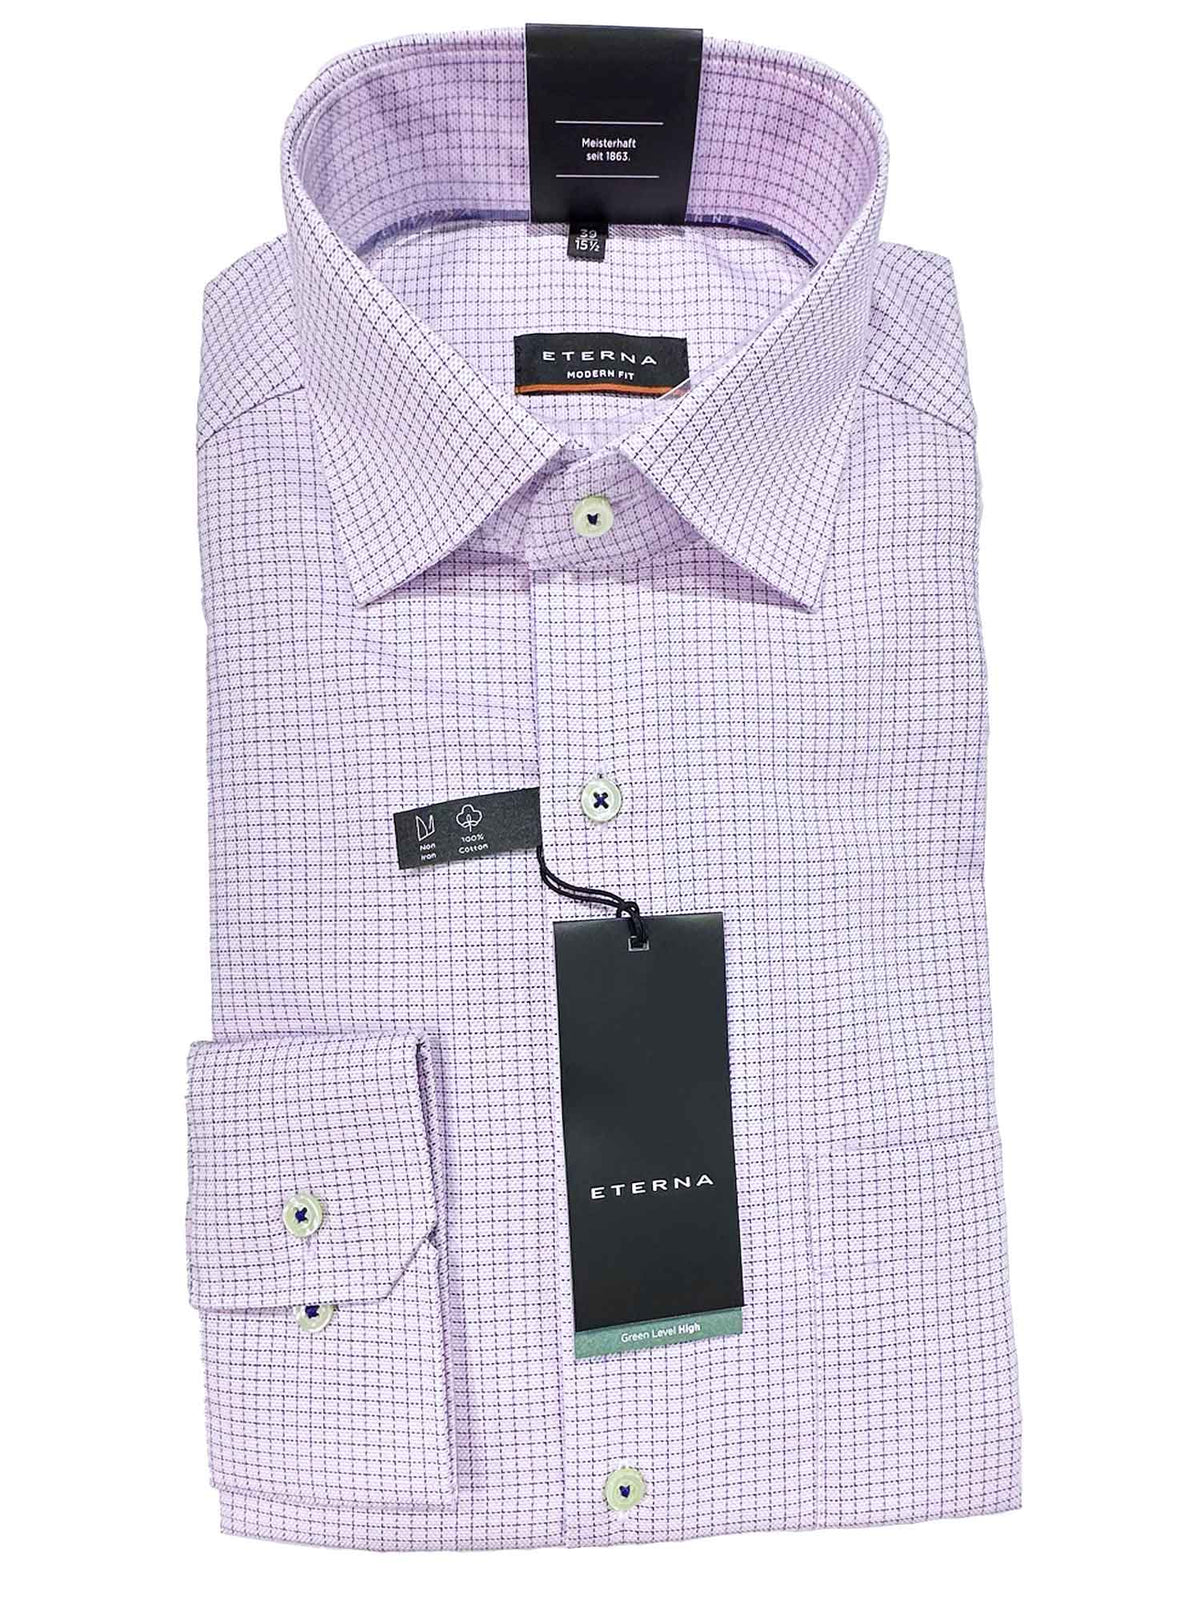 Eterna Shirts Collection – Harrys for Menswear